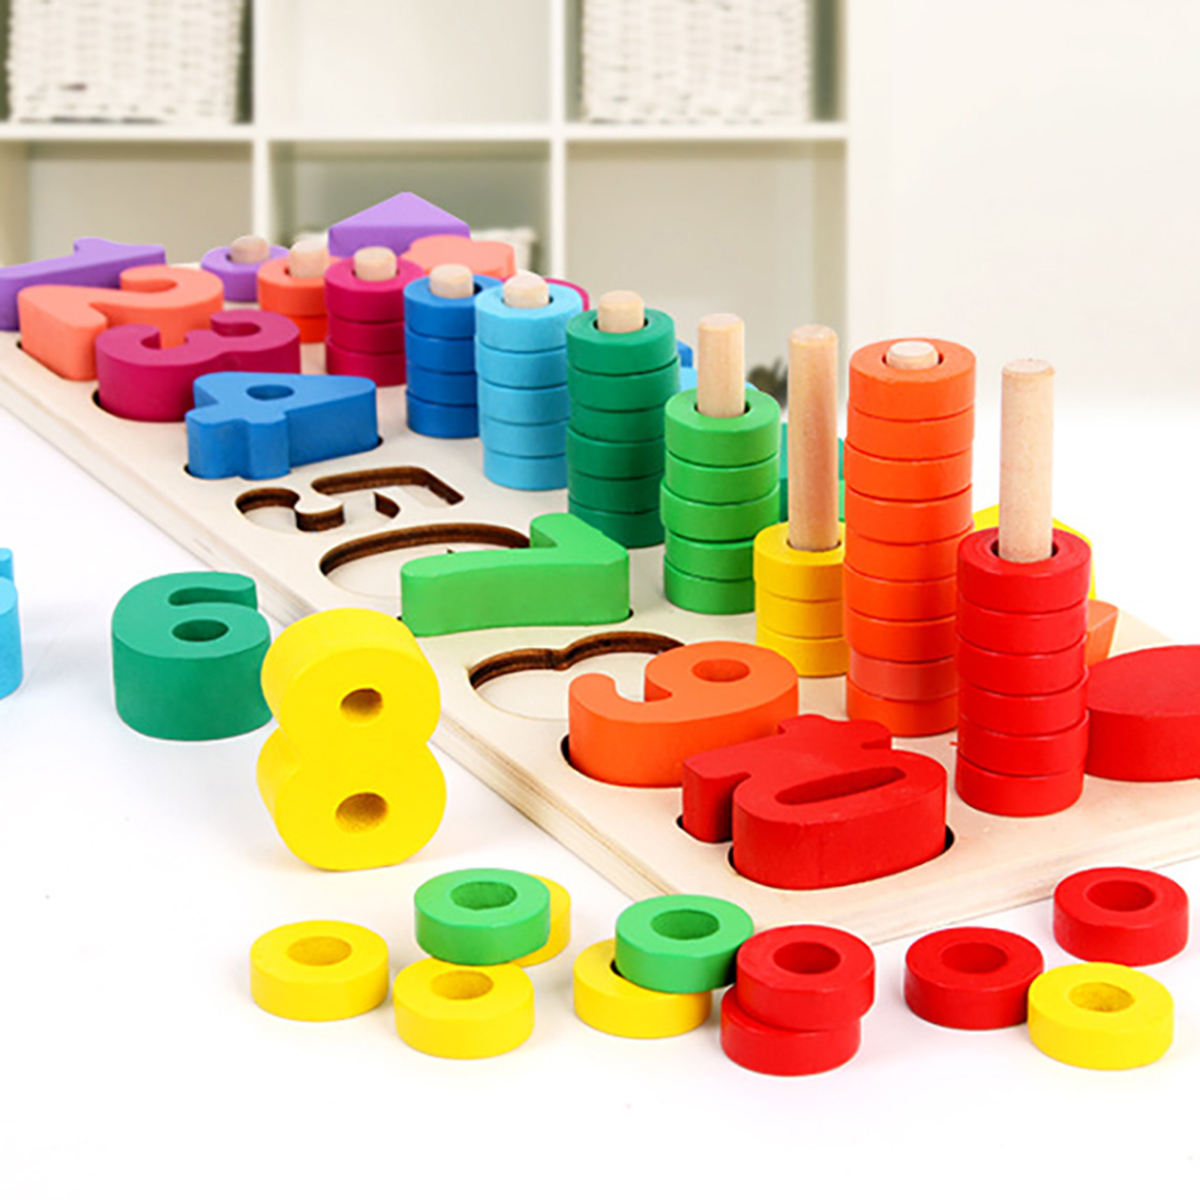 Children-Wooden-Montessori-Materials-Learning-To-Count-Numbers-Matching-Digital-Shape-Match-Early-Ed-1605437-4